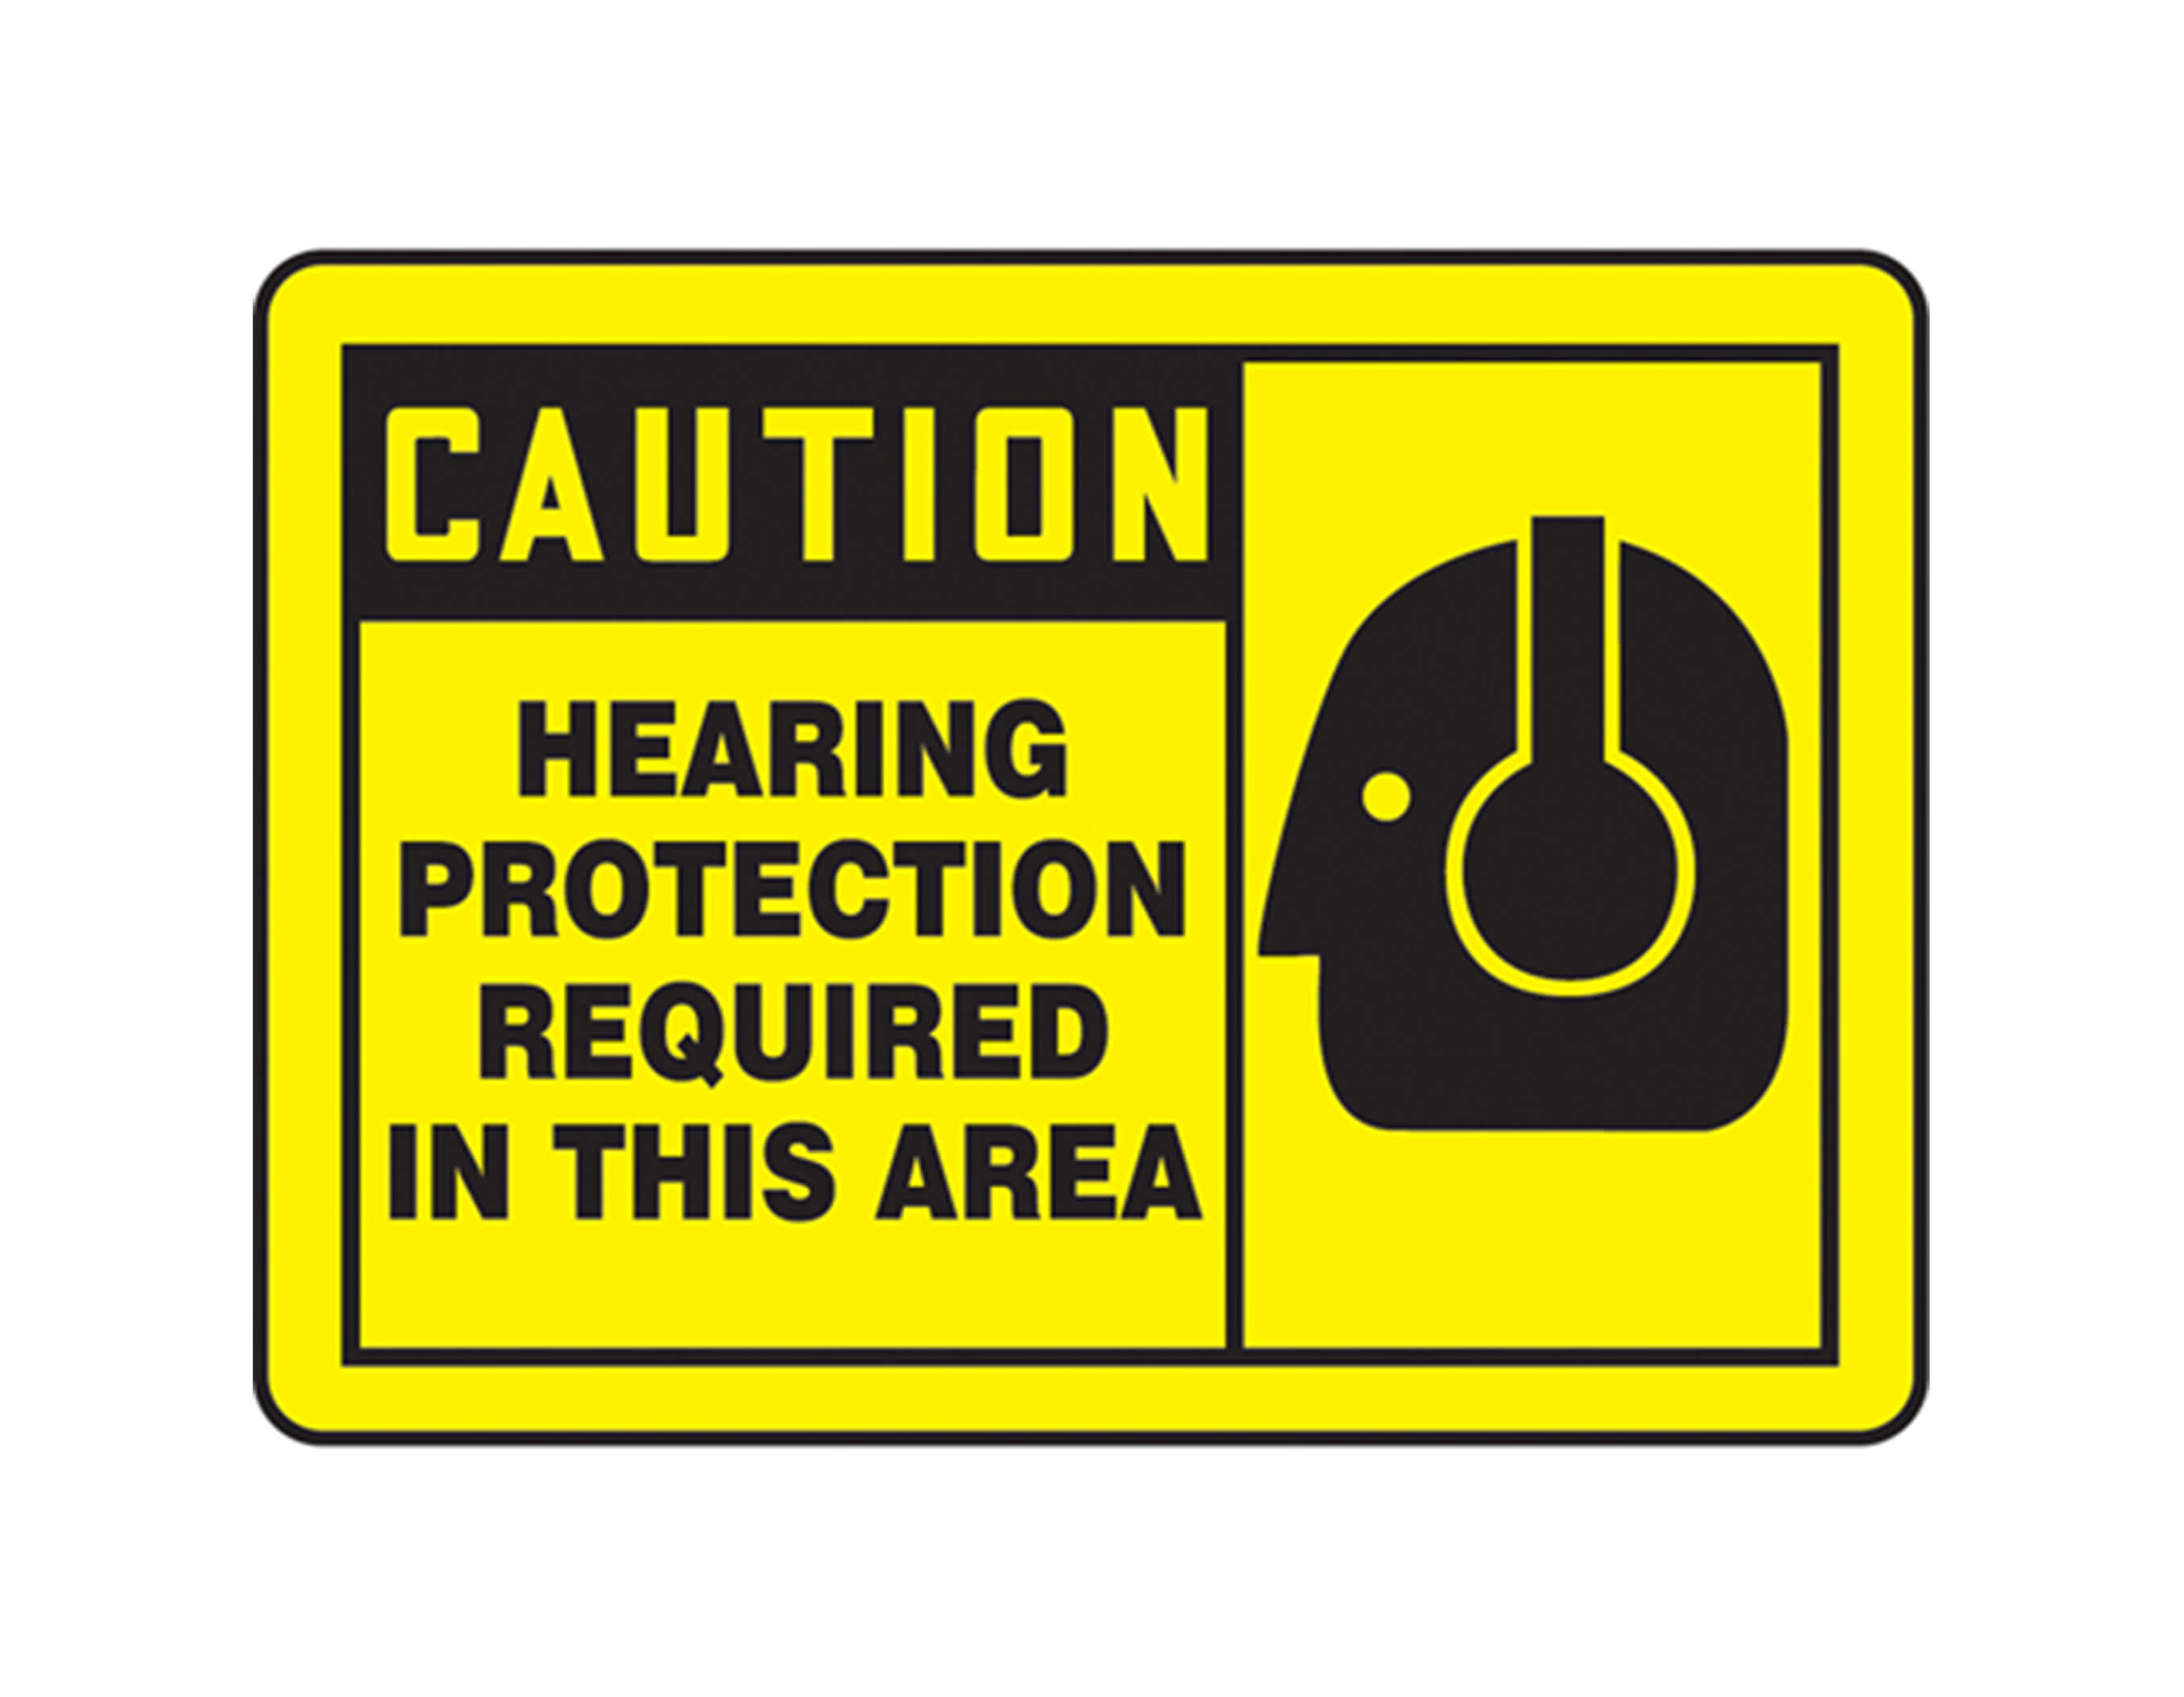 "Hearing Protection Required" Sign